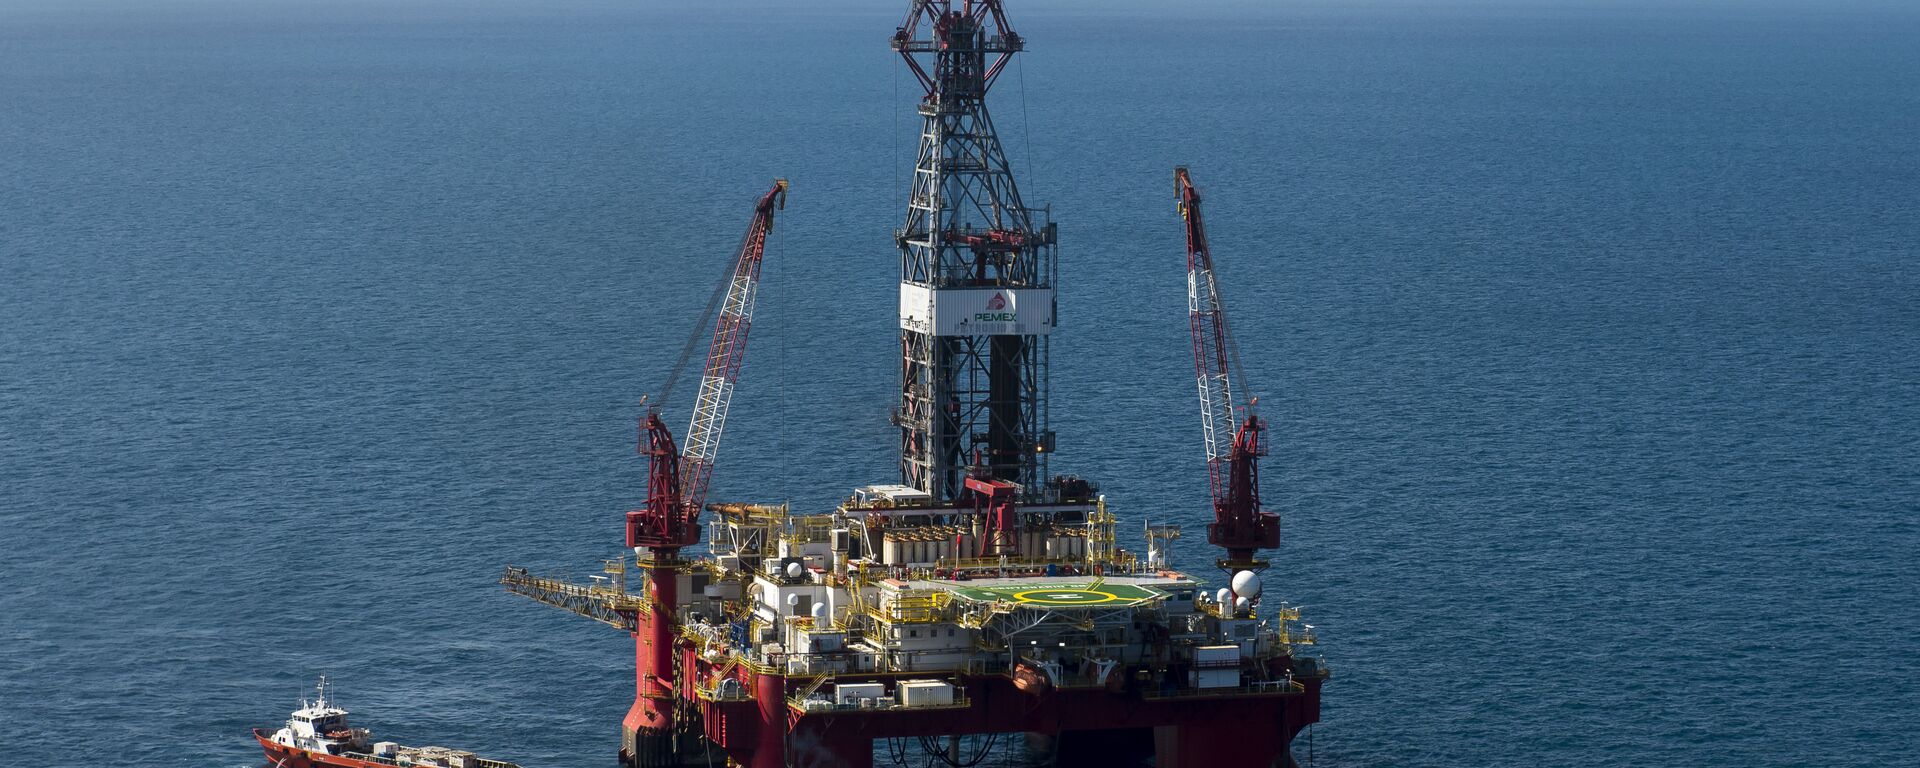 Aerial view of the Centenario exploration oil rig, operated by Mexican company Grupo R and working for Mexico's state-owned oil company PEMEX, in the Gulf of Mexico on August 30, 2013. - Sputnik Mundo, 1920, 06.07.2021